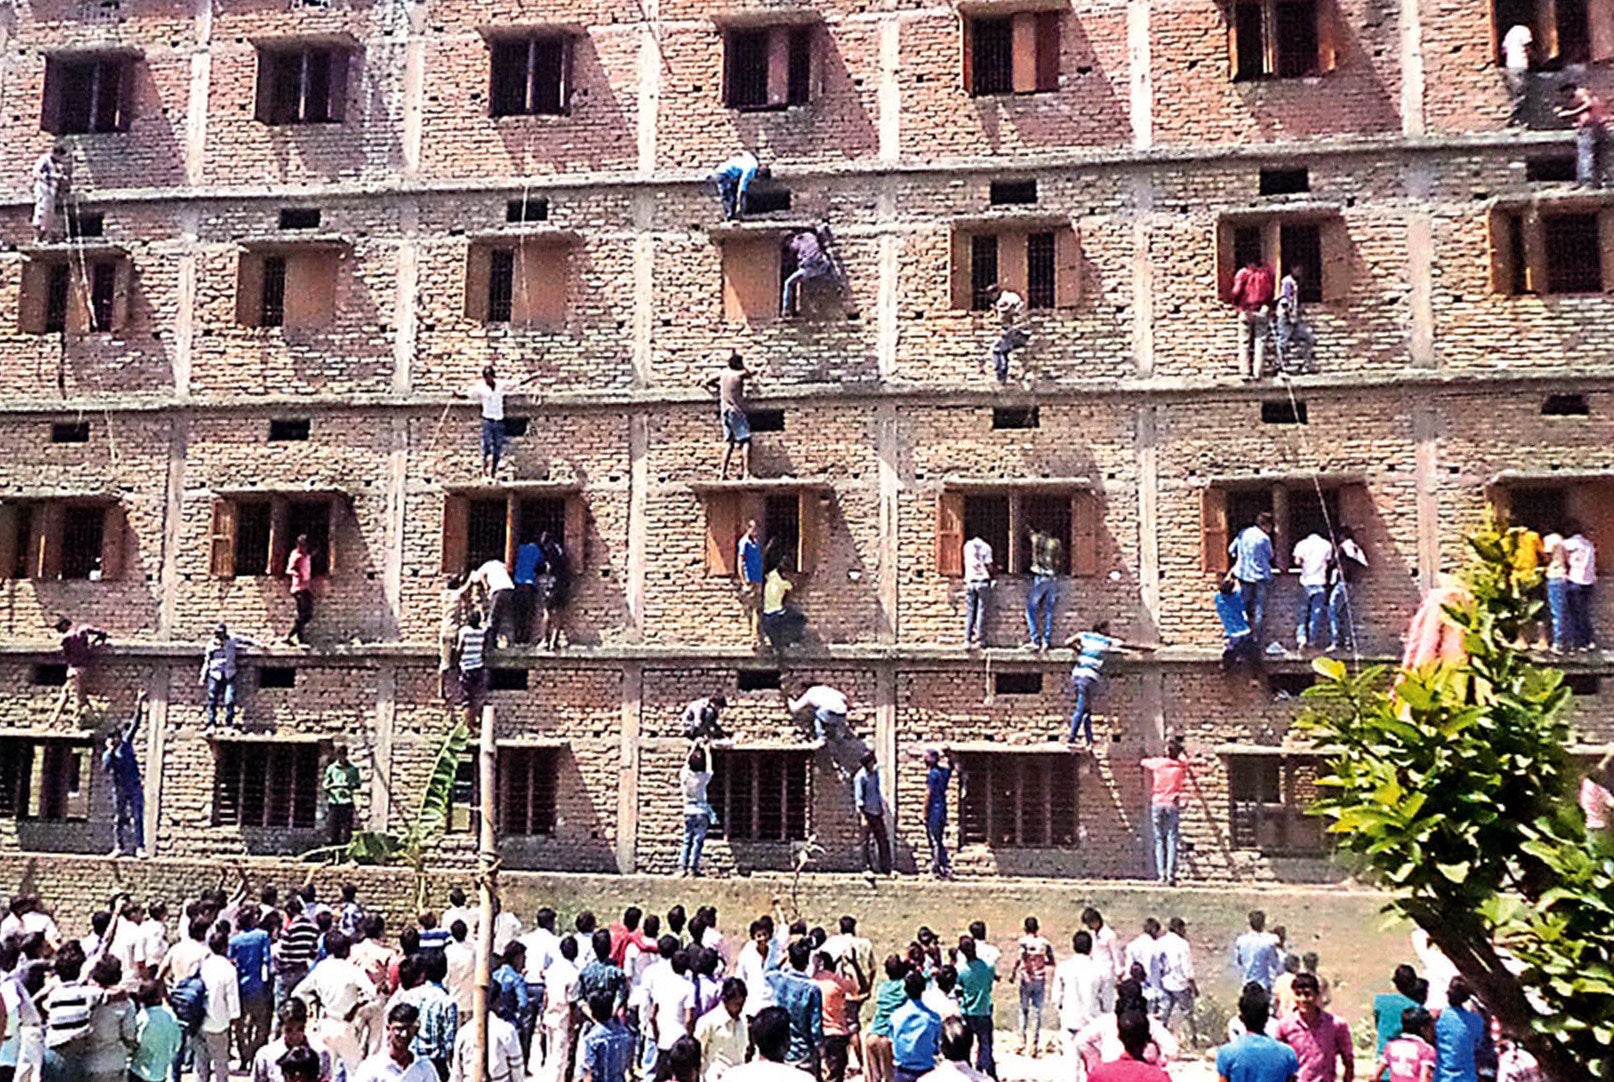 In this photograph taken on 19 March 2015, Indian relatives of students taking school exams climb the walls of the exam building to help pass candidates answers to questions in Vaishali in Bihar